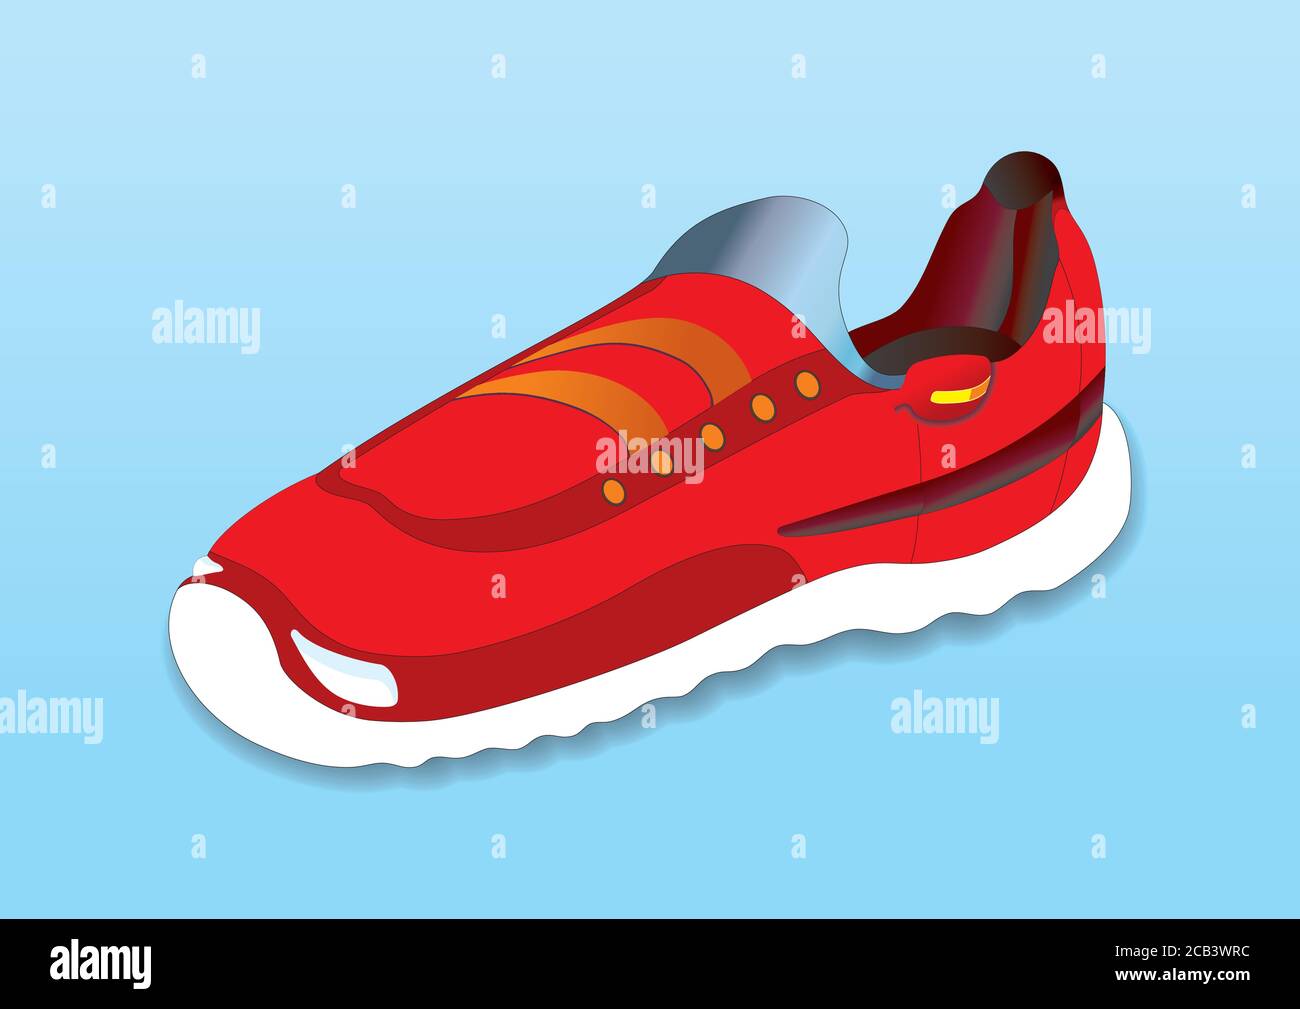 A sports sneaker that looks like a racing car, racing car-like sports shoe. Sport and casual footwear concept. Stock Vector